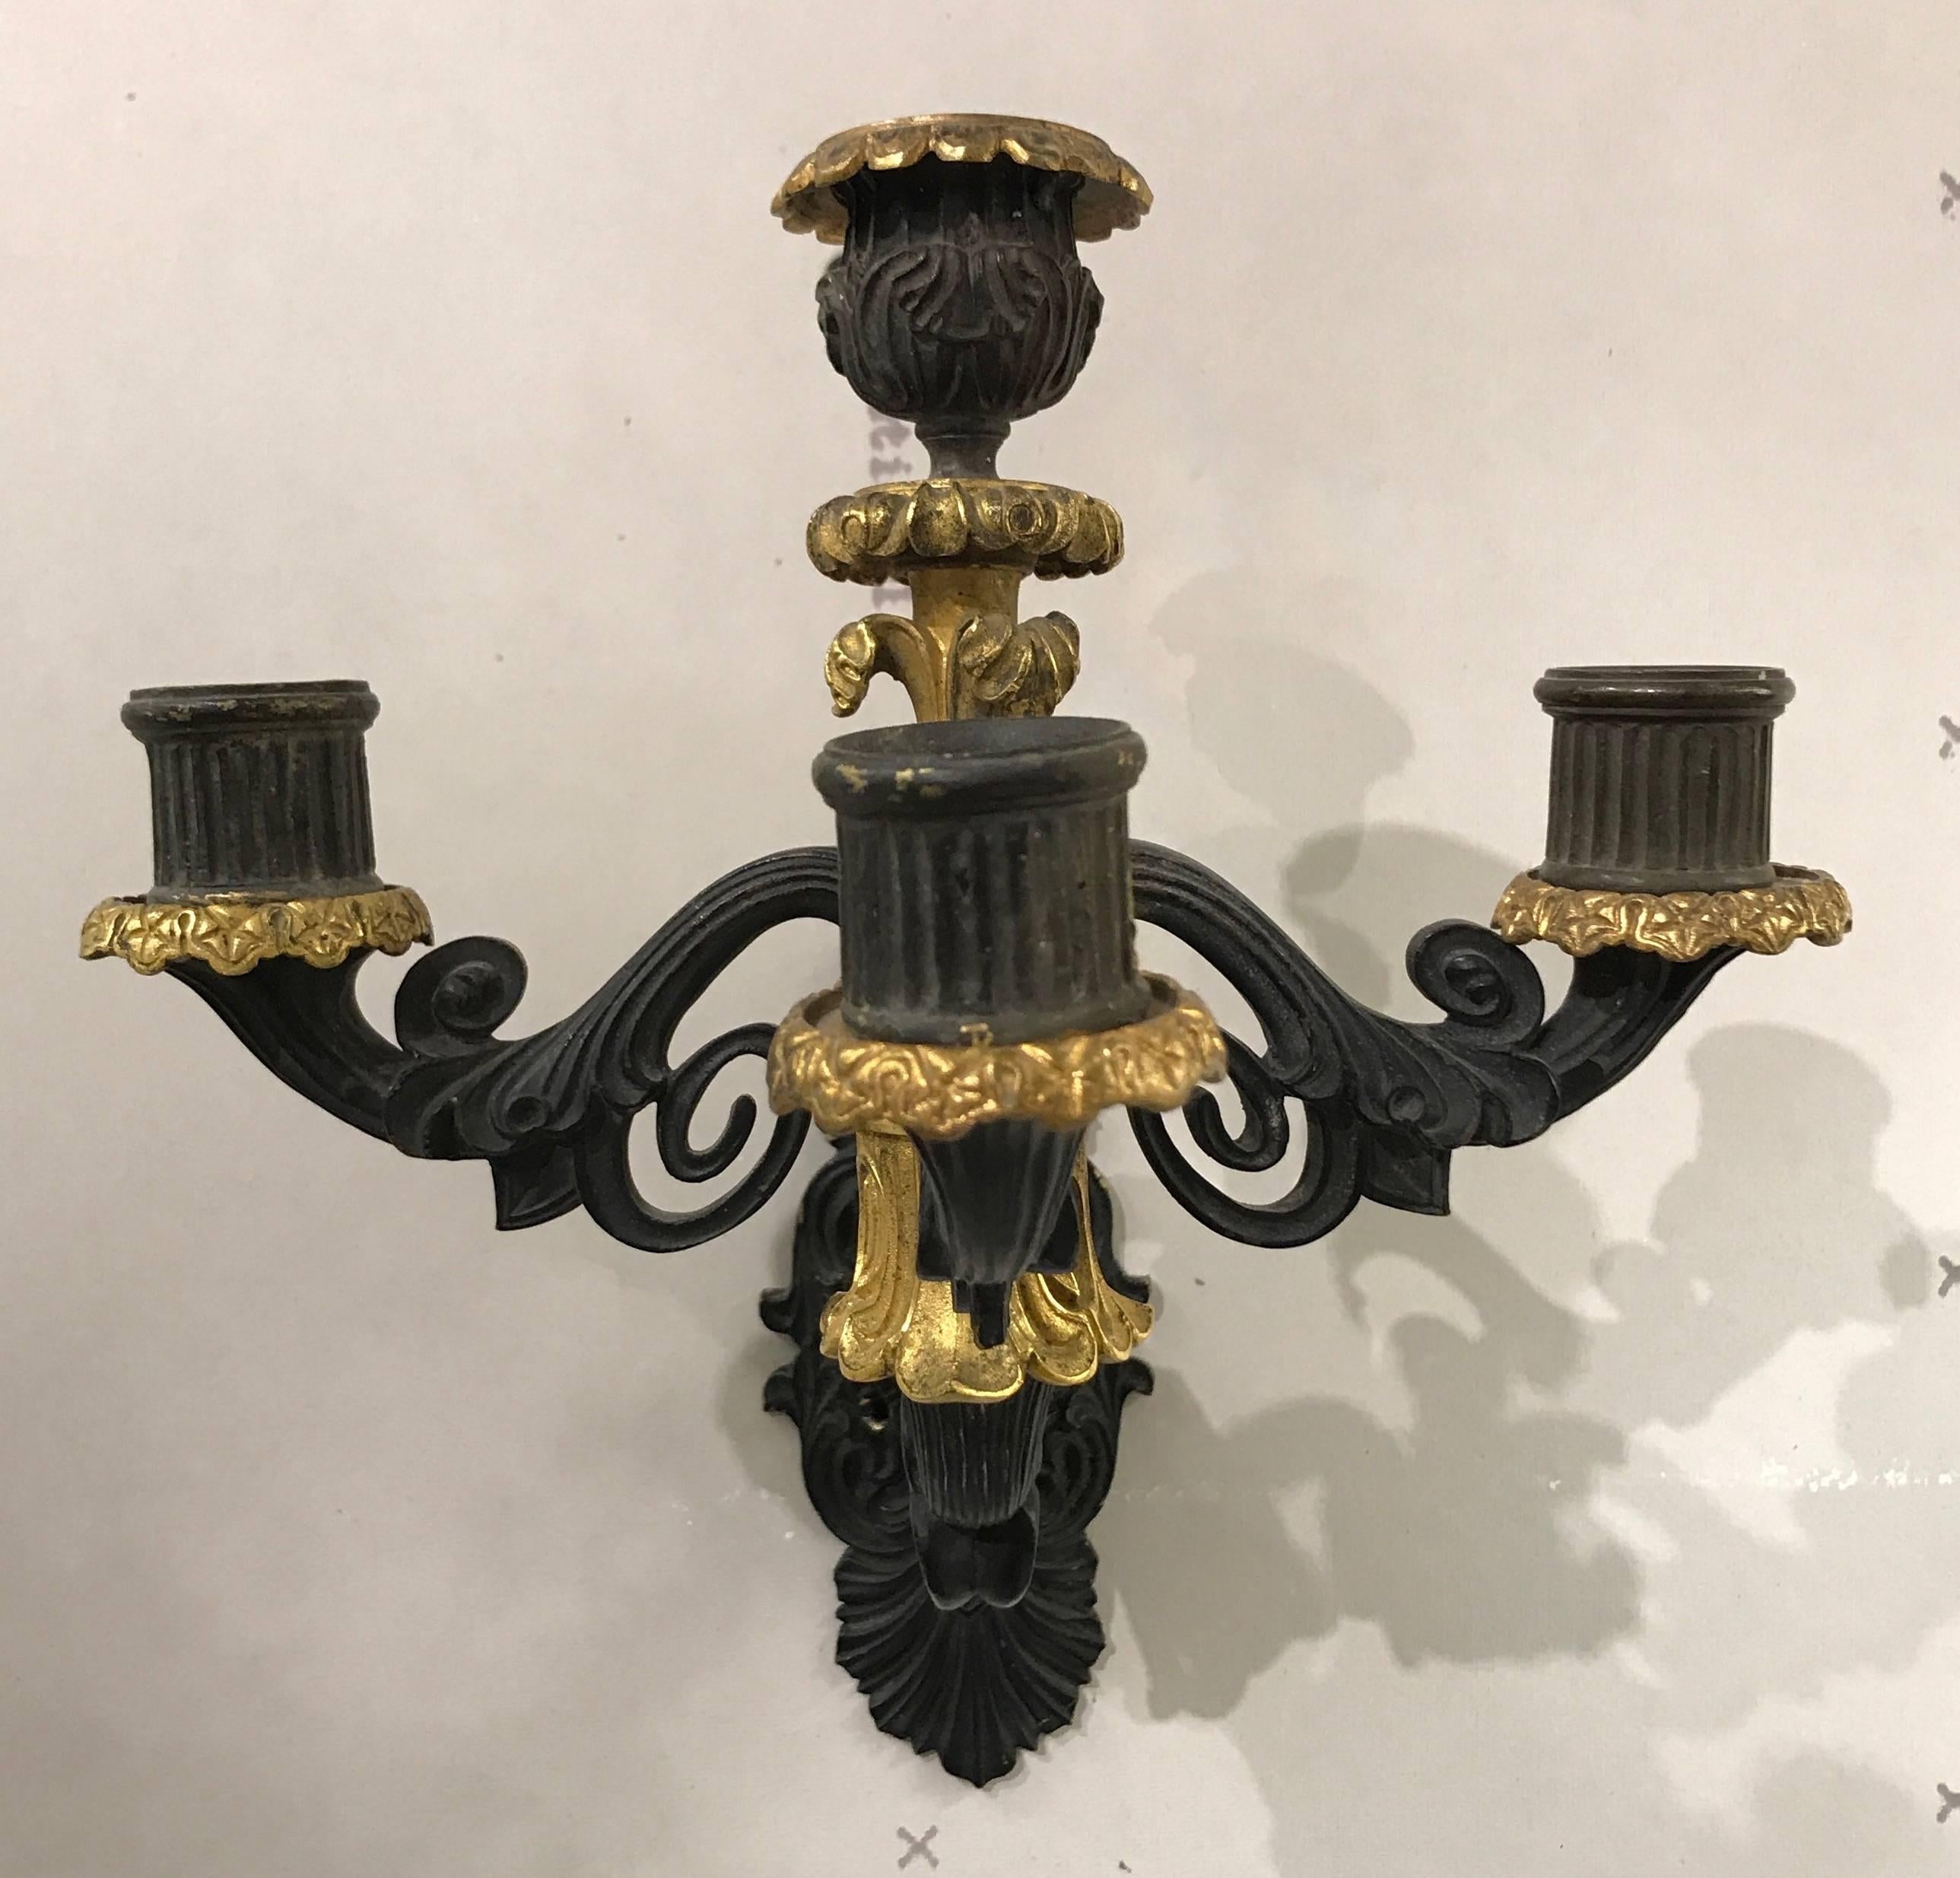 Pair of four-arm black and gilt bronze sconces with scrolled arms and decorative backplates. Drilled for wiring.